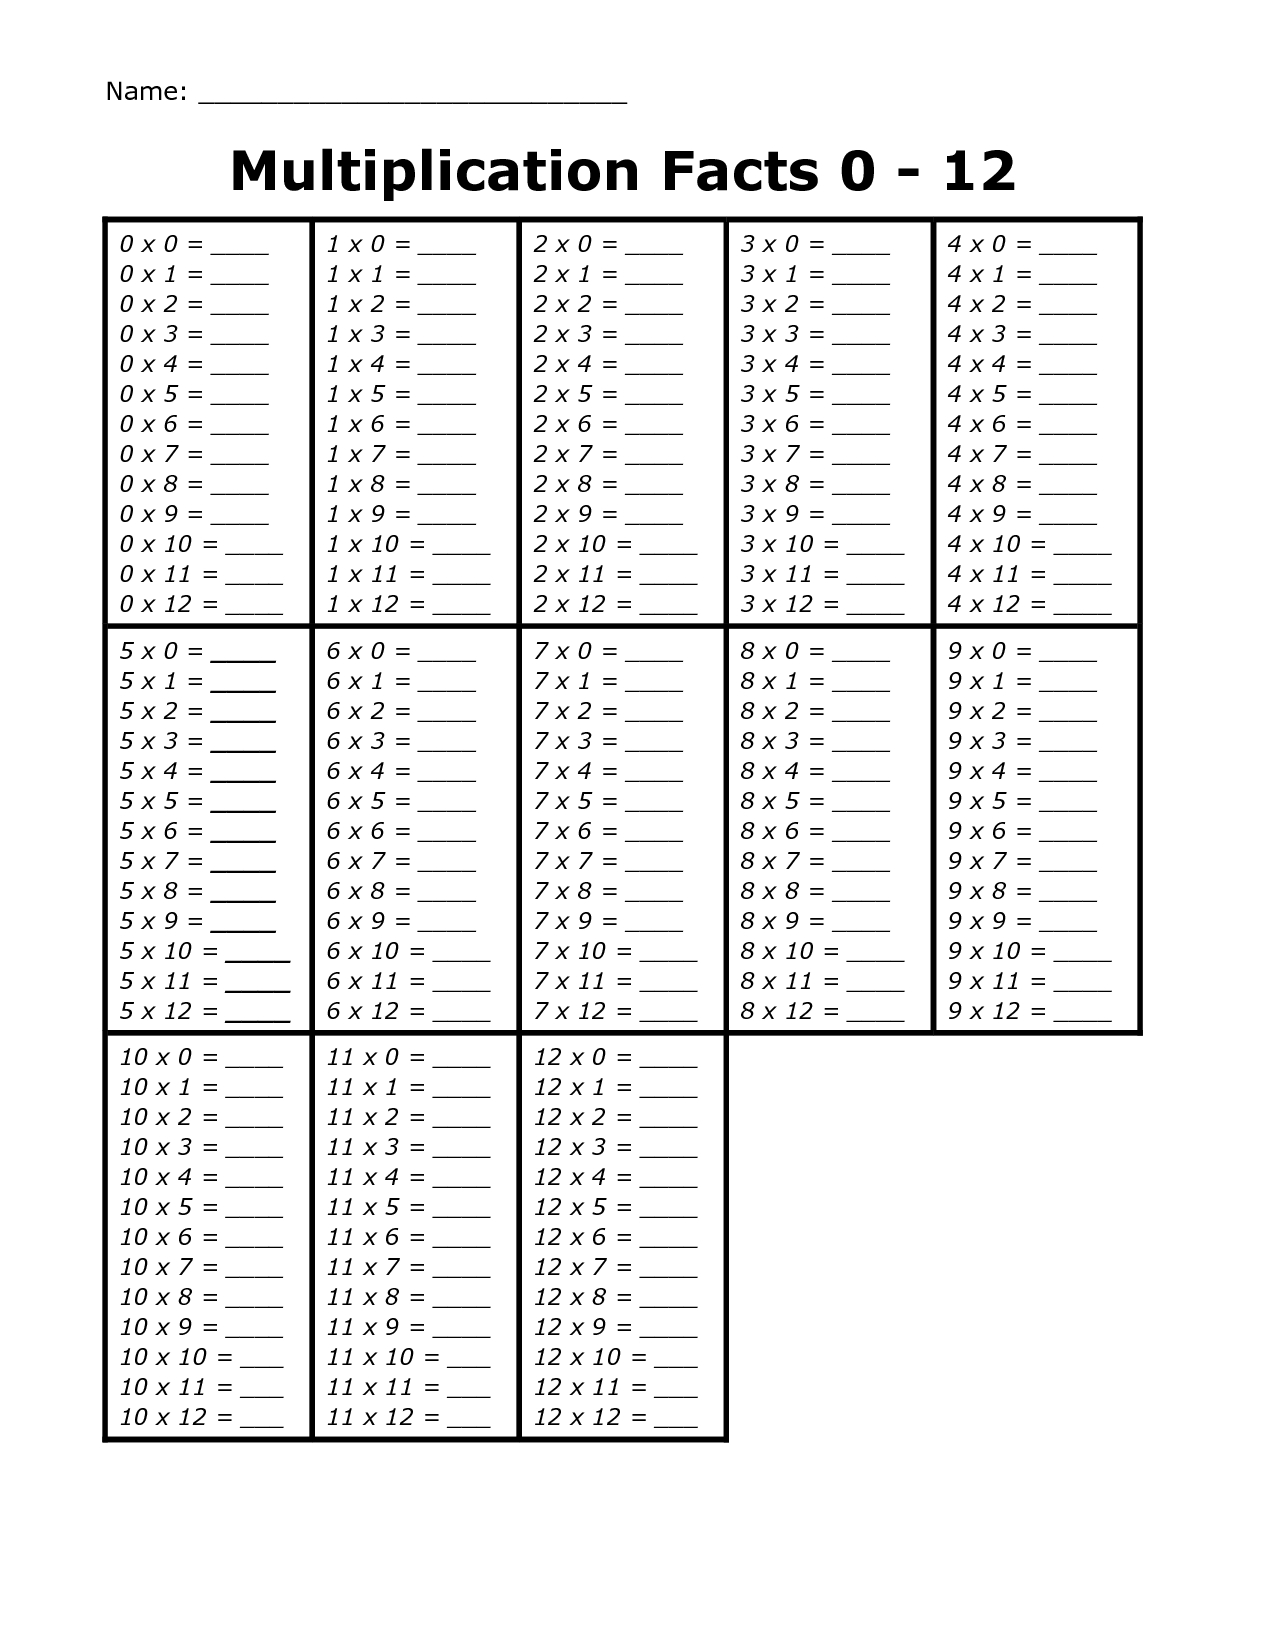 printable-multiplication-quizzes-0-12-printable-multiplication-flash-cards